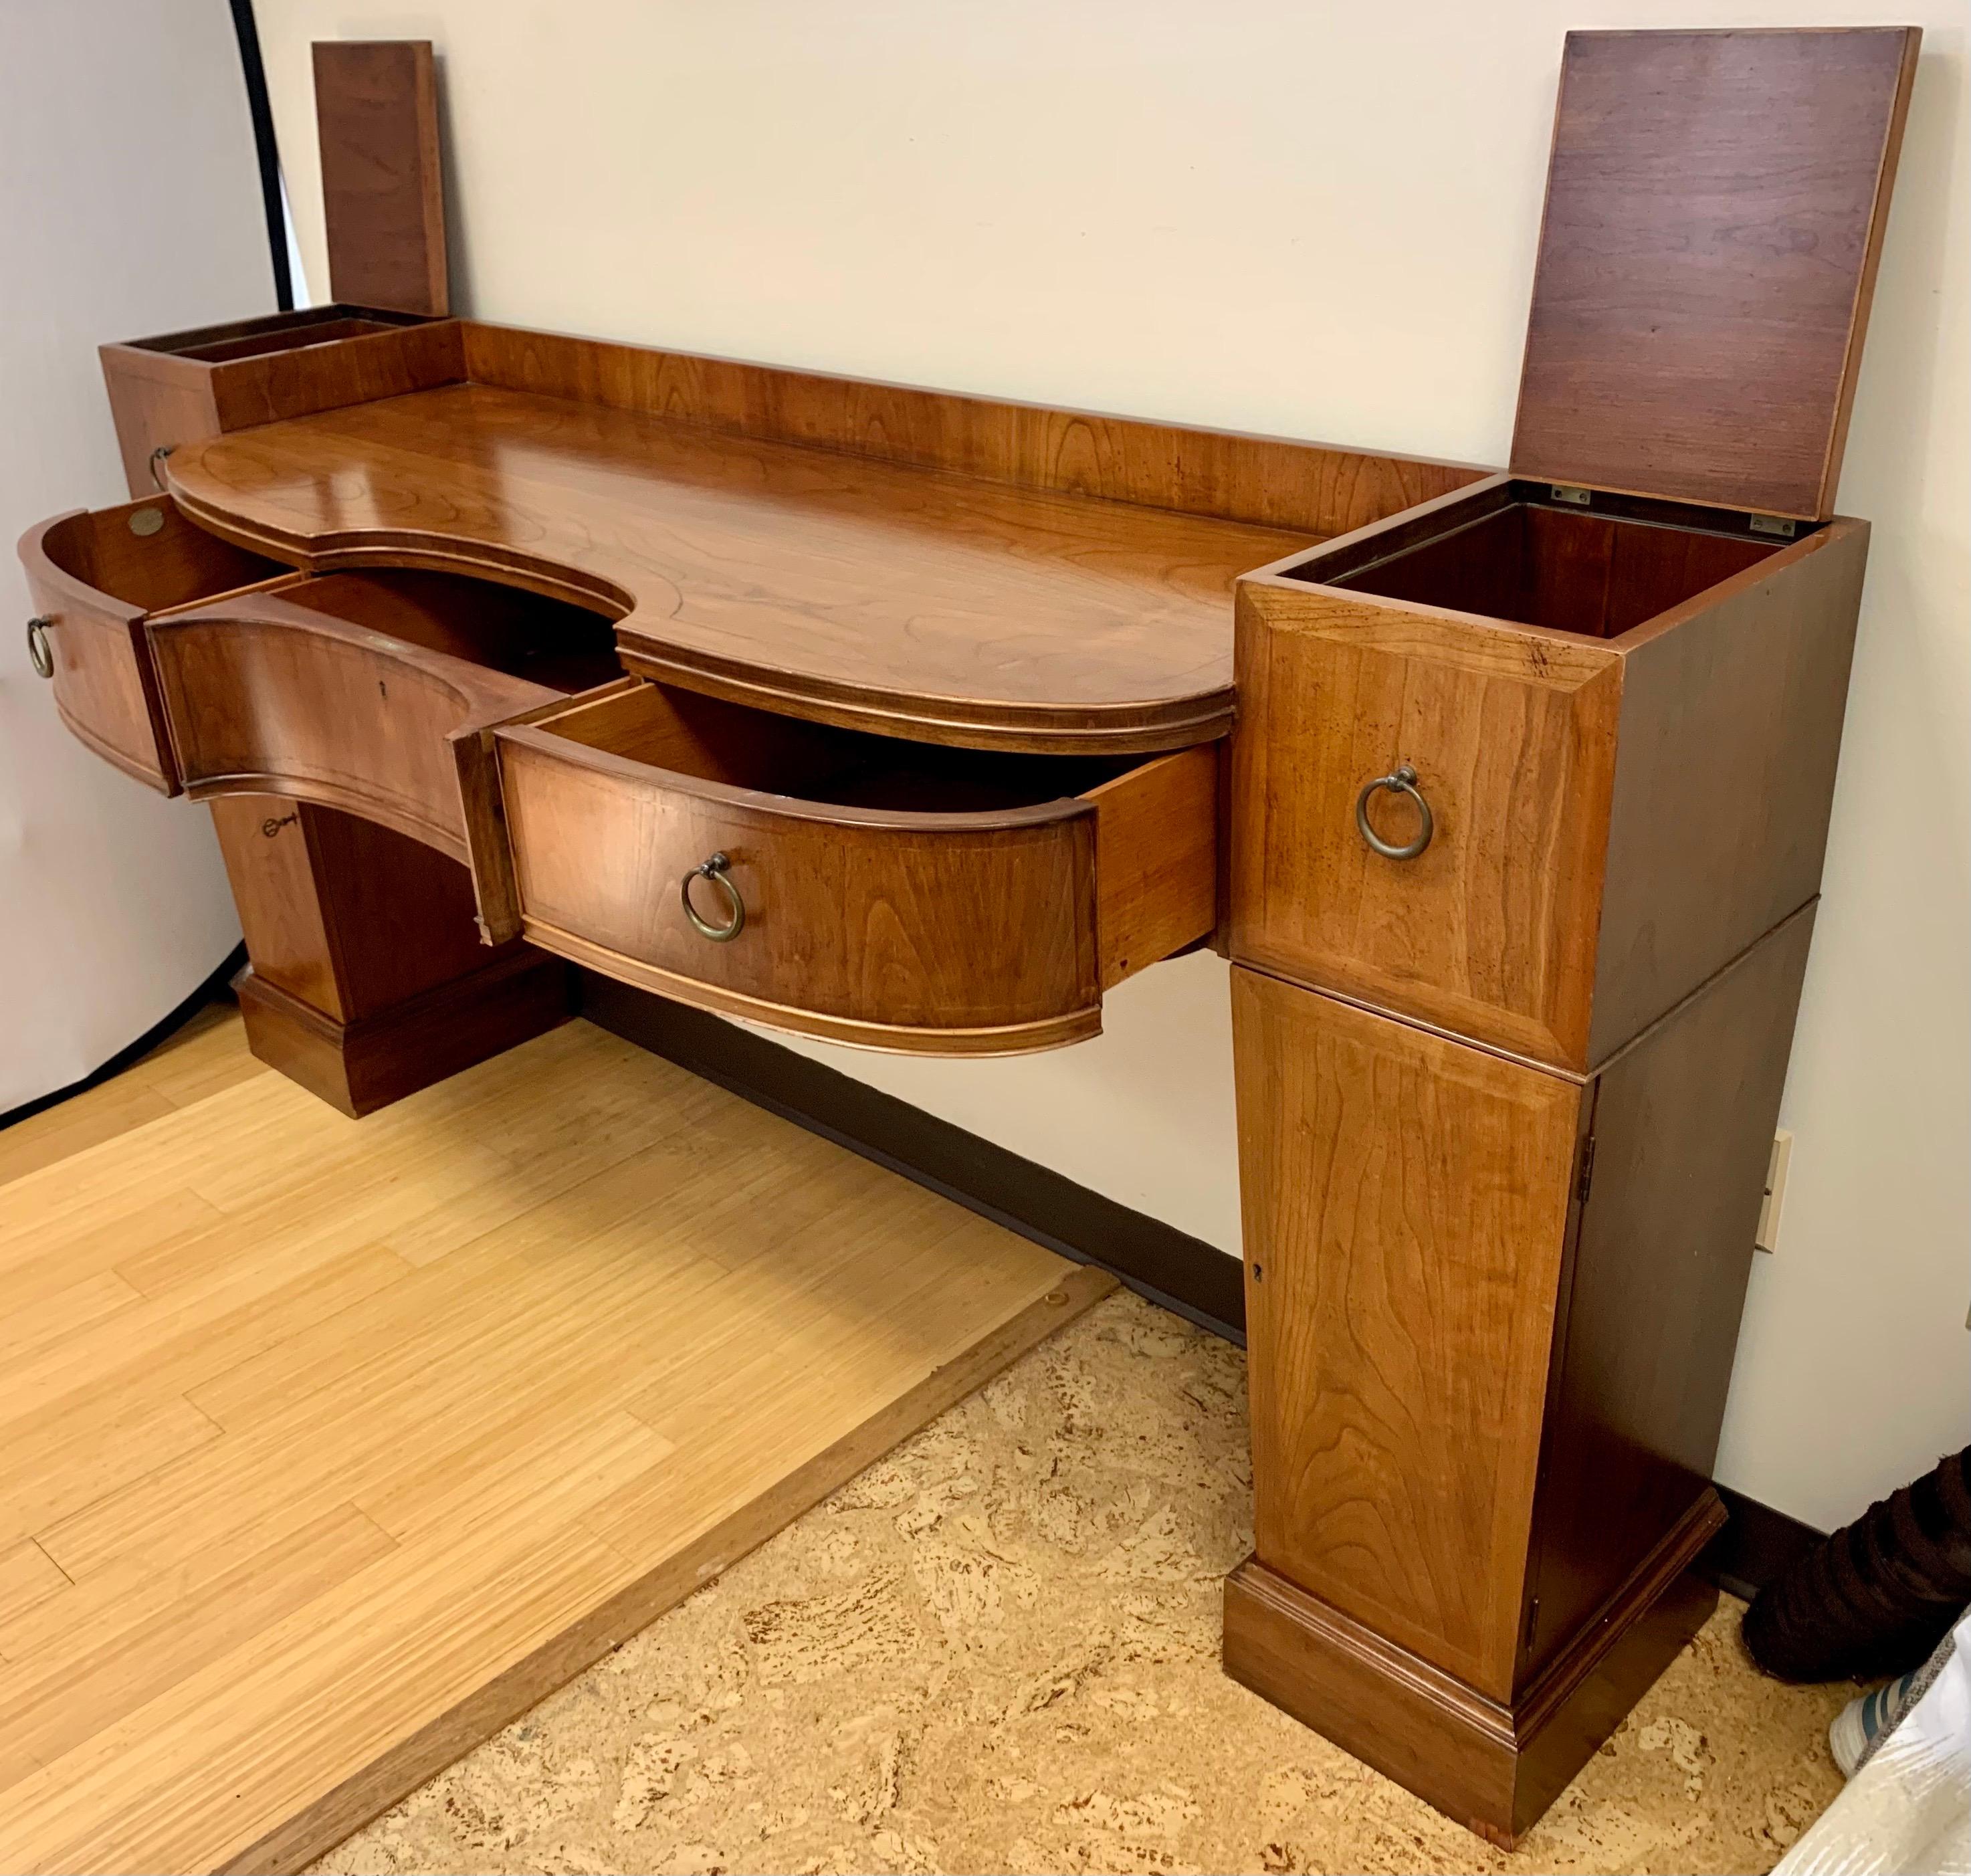 Elegant signed Baker Furniture console credenza featuring a shaped center drawer and side pedestals that flip open for extra storage on top as well as doors that open on bottom with shelves for more storage. Great lines and better scale. Age